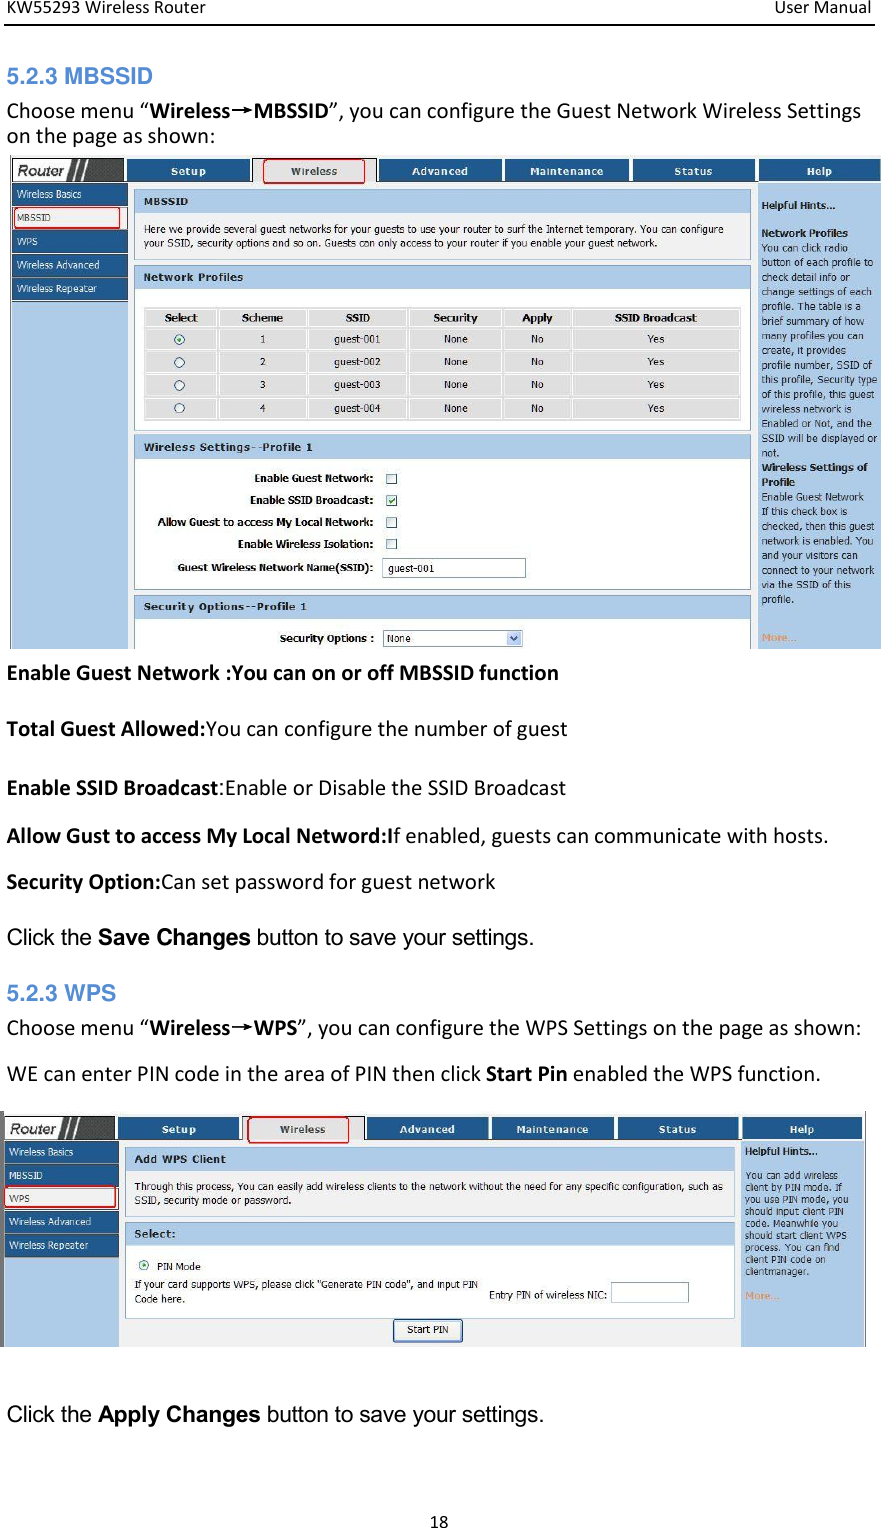 KW55293 Wireless Router         User Manual 18 5.2.3 MBSSID                      Choose eu Wireless→MBSSID, you can configure the Guest Network Wireless Settings on the page as shown:                    Enable Guest Network :You can on or off MBSSID function   Total Guest Allowed:You can configure the number of guest   Enable SSID Broadcast:Enable or Disable the SSID Broadcast Allow Gust to access My Local Netword:If enabled, guests can communicate with hosts.   Security Option:Can set password for guest network Click the Save Changes button to save your settings. 5.2.3 WPS                          Choose eu Wireless→WPS, you can configure the WPS Settings on the page as shown:   WE can enter PIN code in the area of PIN then click Start Pin enabled the WPS function.           Click the Apply Changes button to save your settings. 